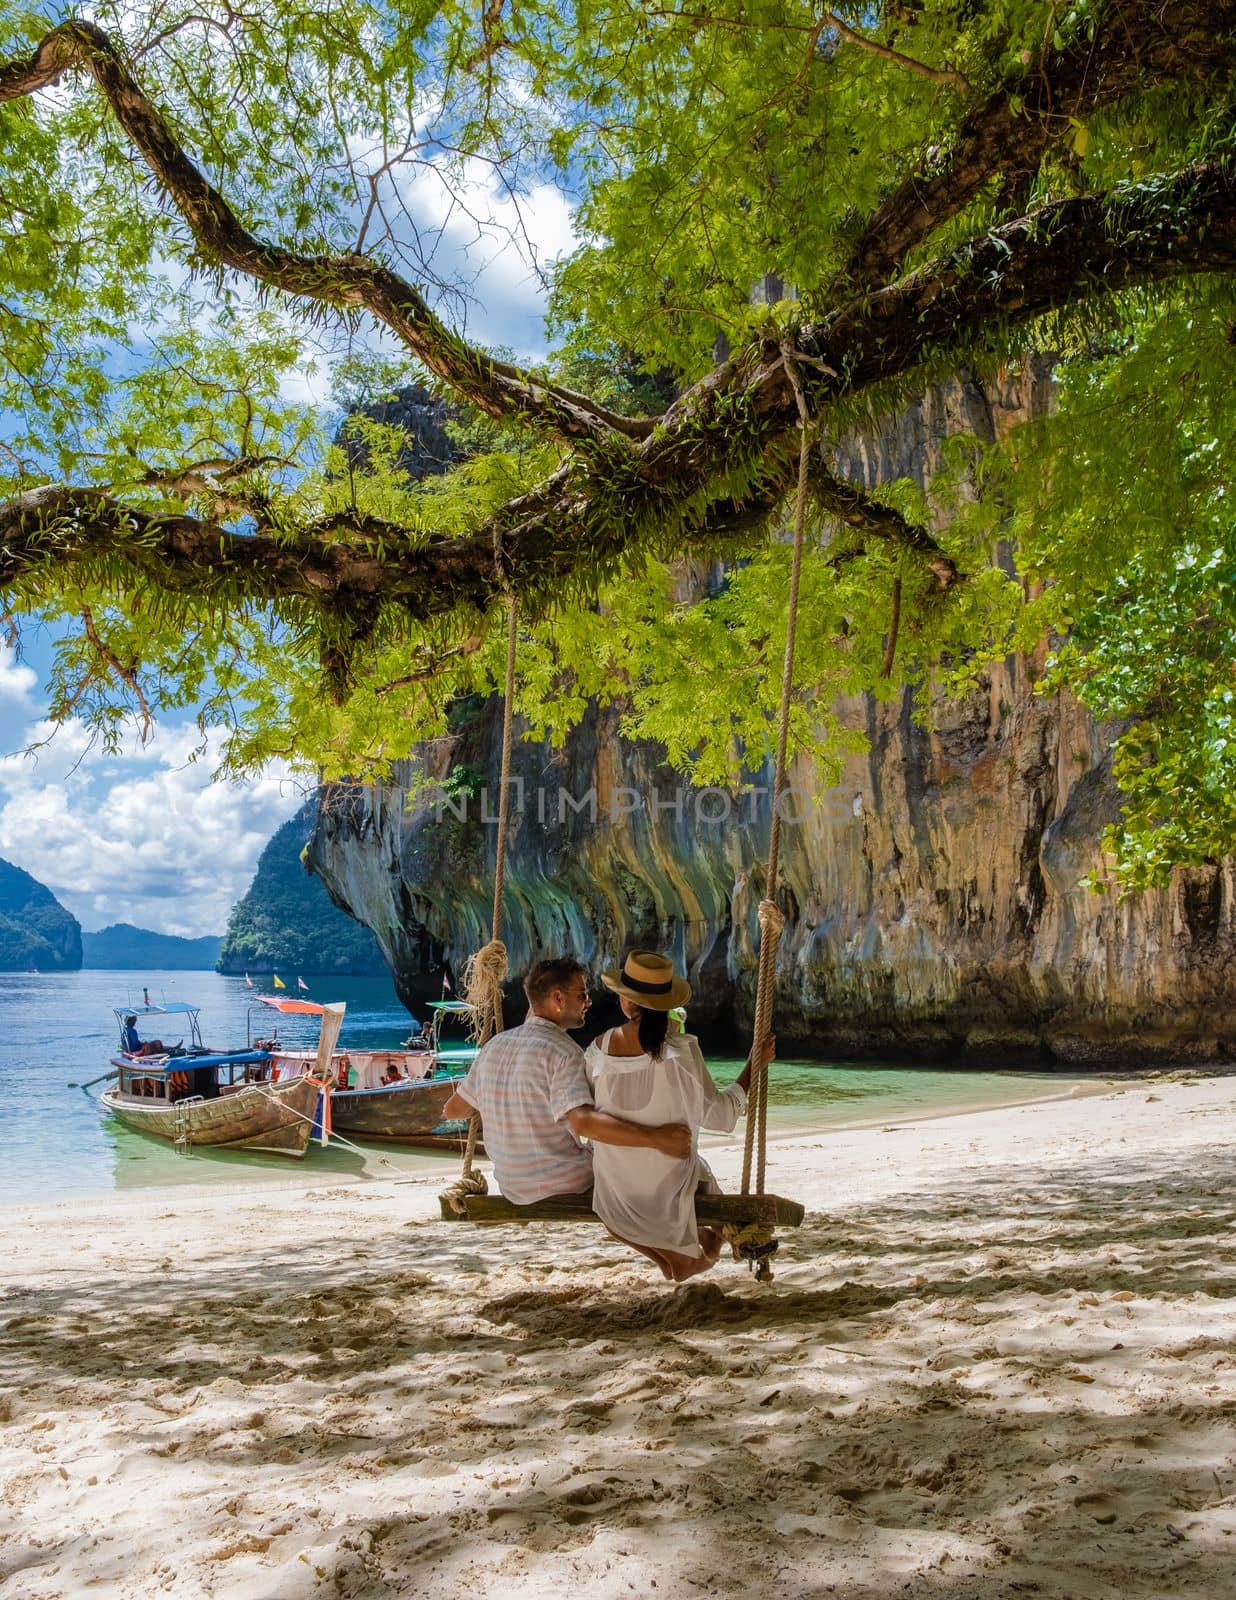 Couple on a boat trip to the Tropical lagoon of Koh Loa Lading Krabi Thailand part of the Koh Hong Islands in Thailand. beautiful beach with limestone cliffs and longtail boats